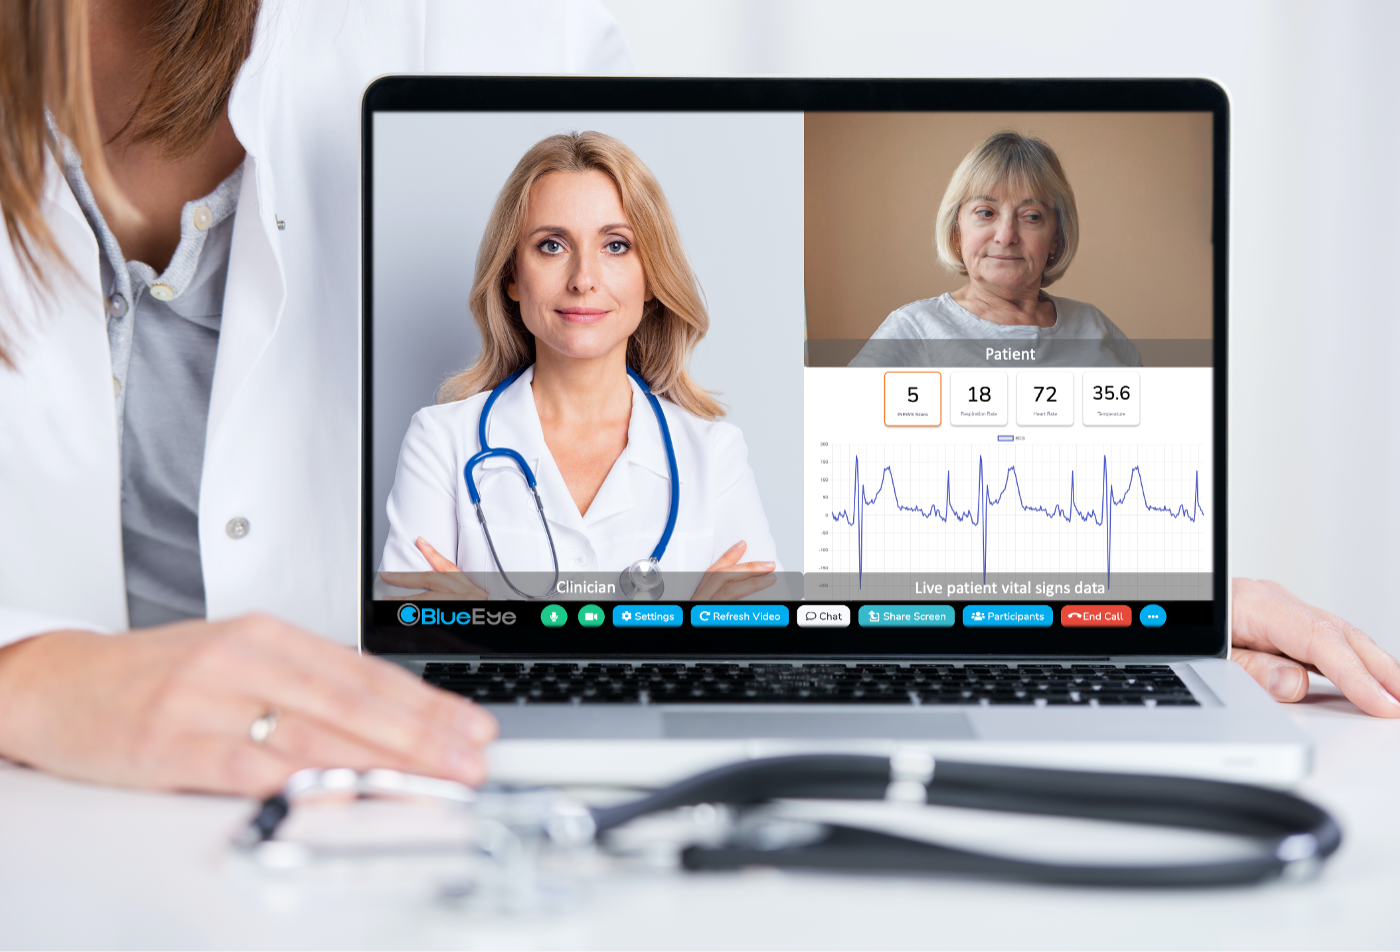 A doctor showing a laptop screen with doctor and patient video along with patient vital signs data